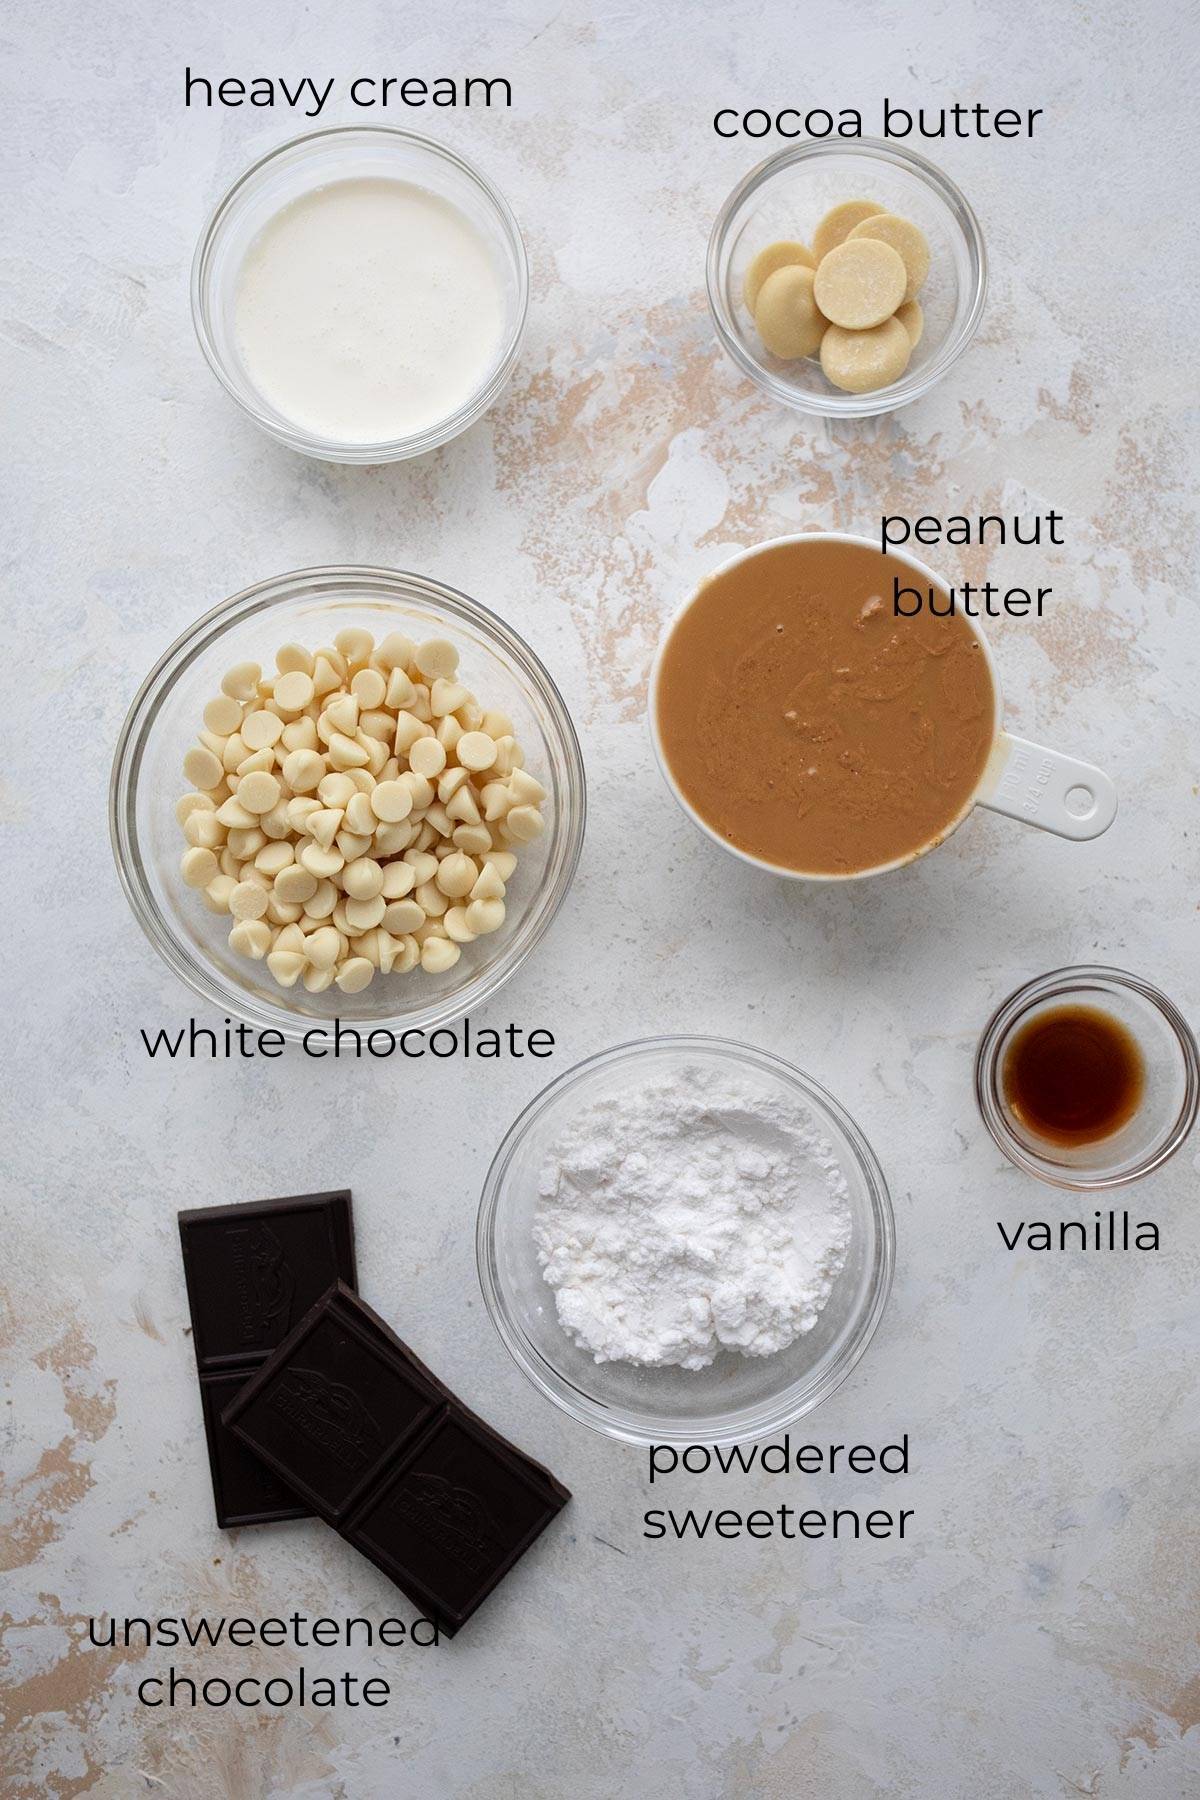 Top down image of ingredients needed to make Keto Tiger Butter candy.